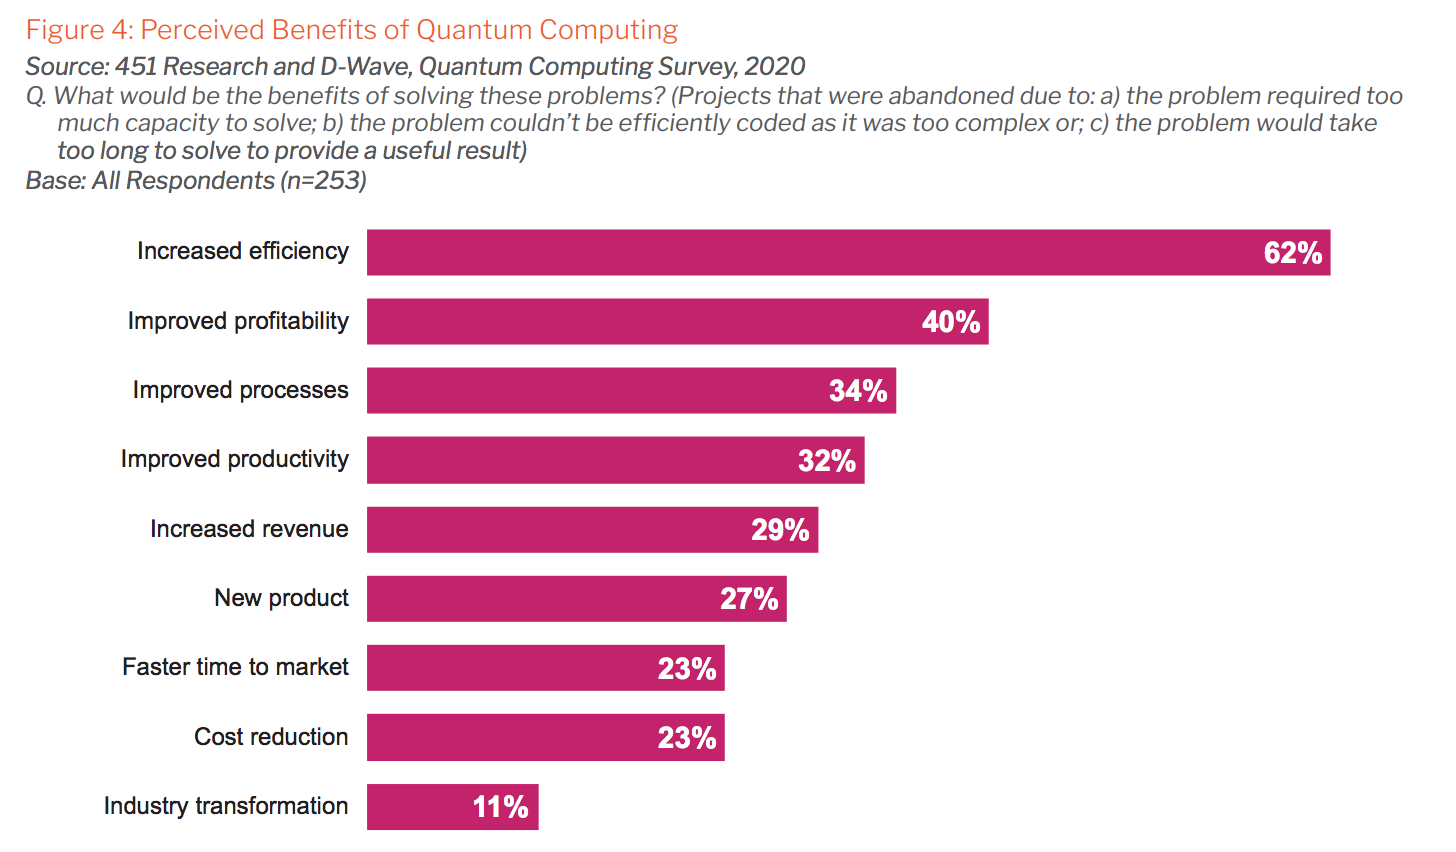 Business Benefits with Quantum Computing: Business decision makers cite increased efficiency and improved profitability as benefits from use of quantum computing.